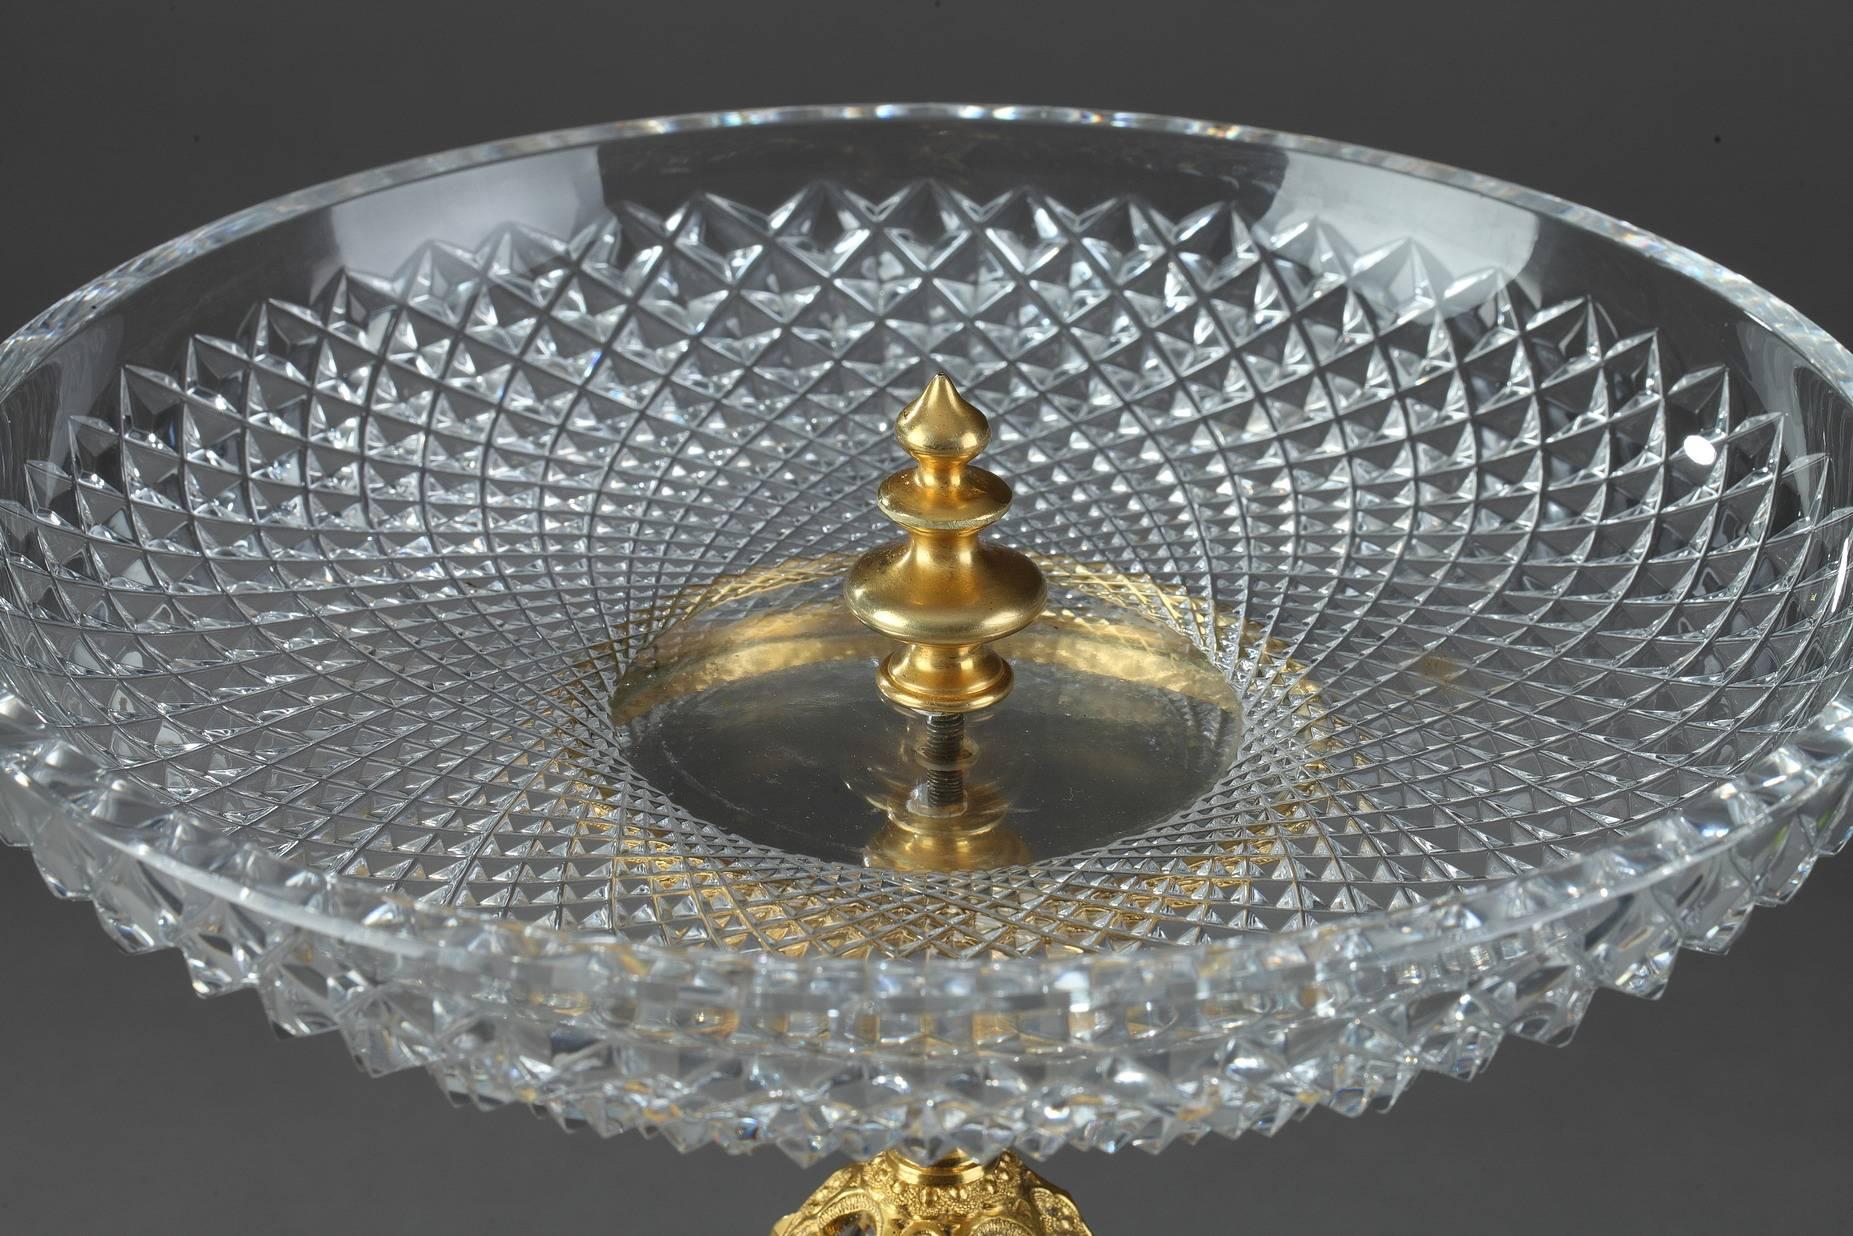 A 20th century cut crystal and gilt bronze dish in Renaissance taste. The circular cup is decorated with cut-diamond patterns. It is set on a baluster-shaped stem that is embellished with gilt bronze pearls and floral motifs,

circa